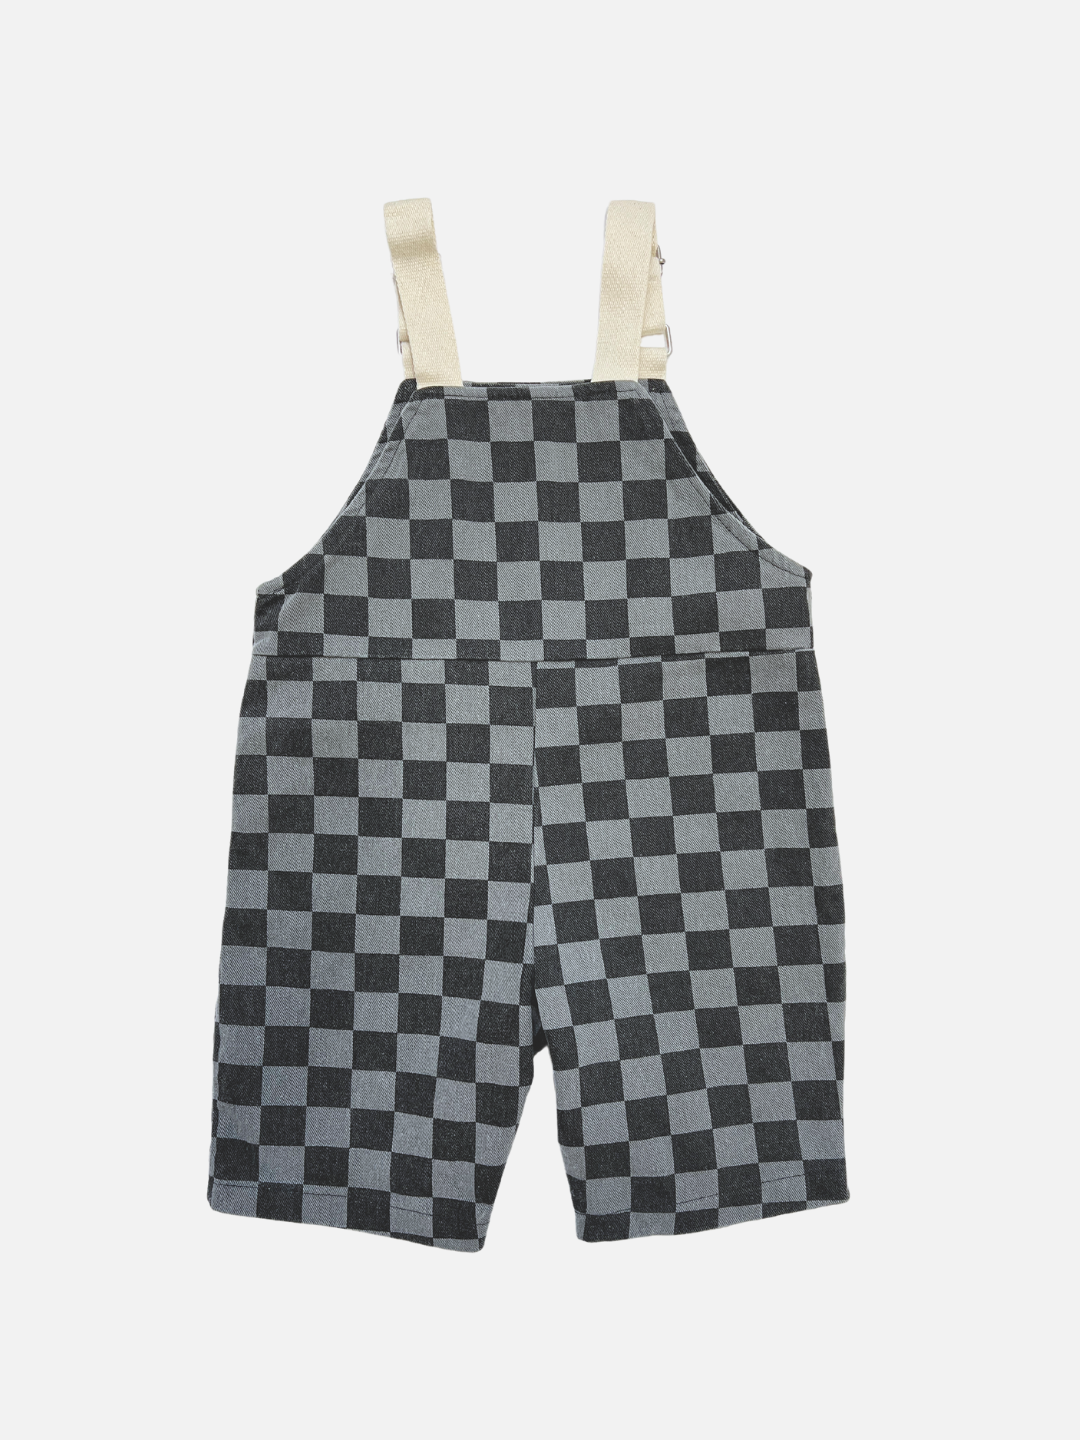 A back view of the kid's pull-on checker overalls in charcoal